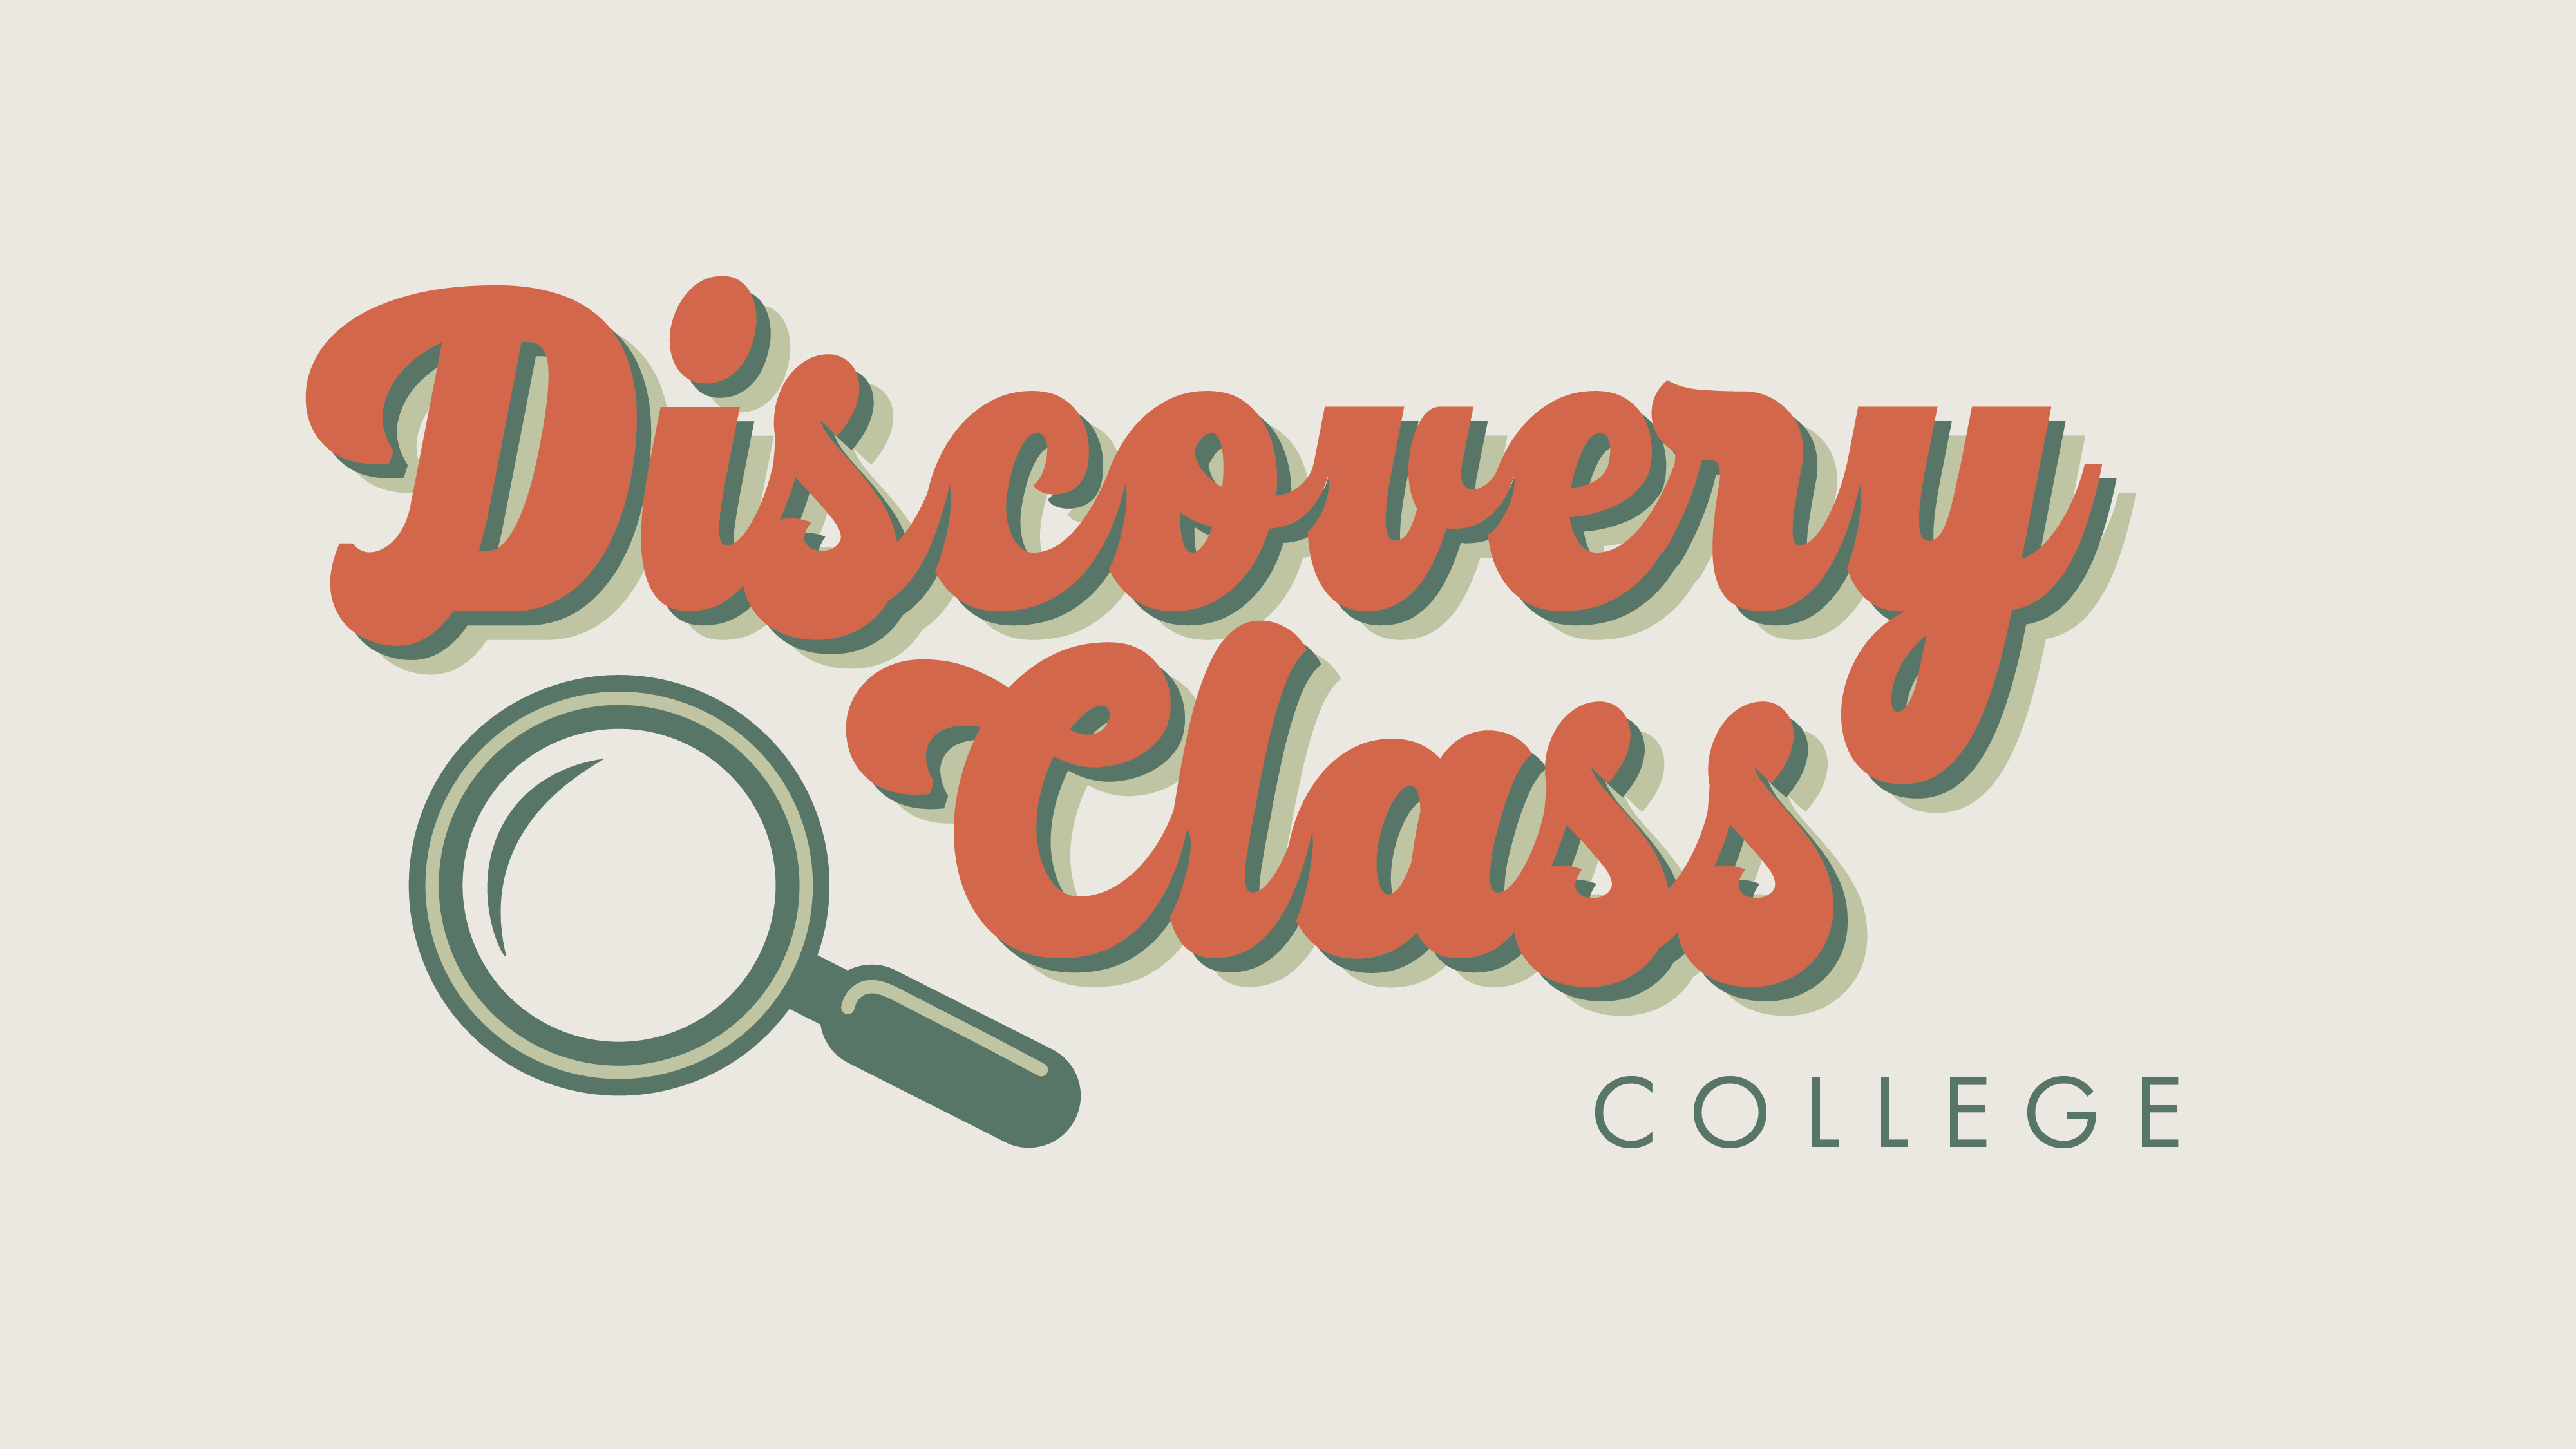 Discovery Class: College